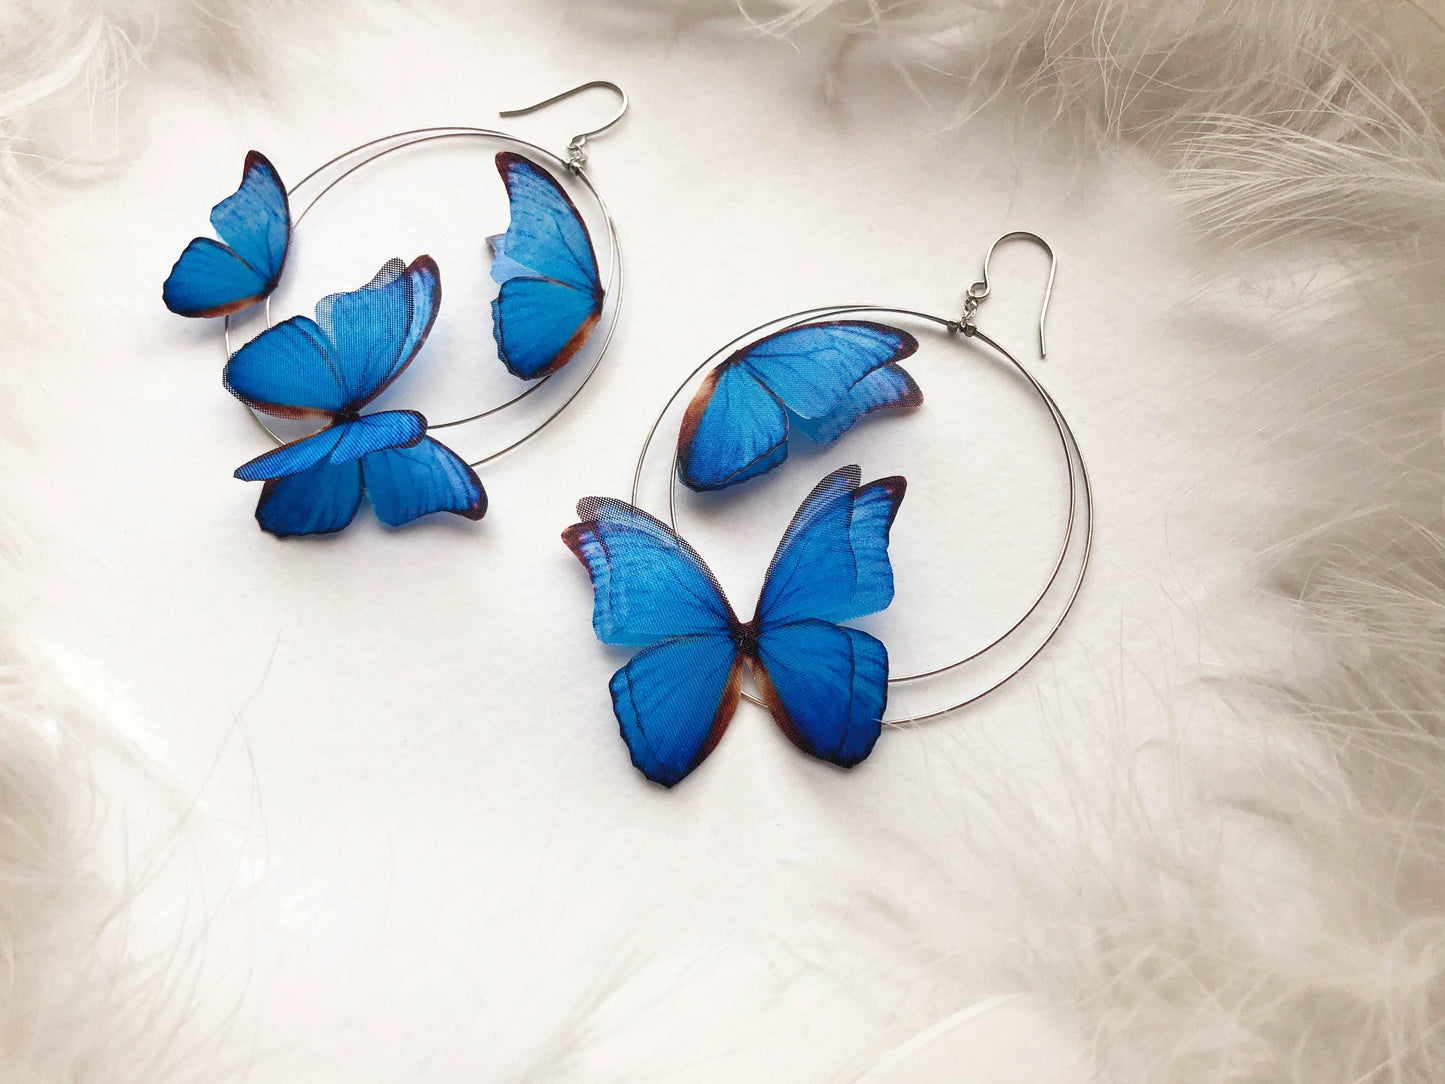 silver color Hoop Earrings featuring vibrant blue butterfly charms, handmade by a skilled crafter using high-quality materials